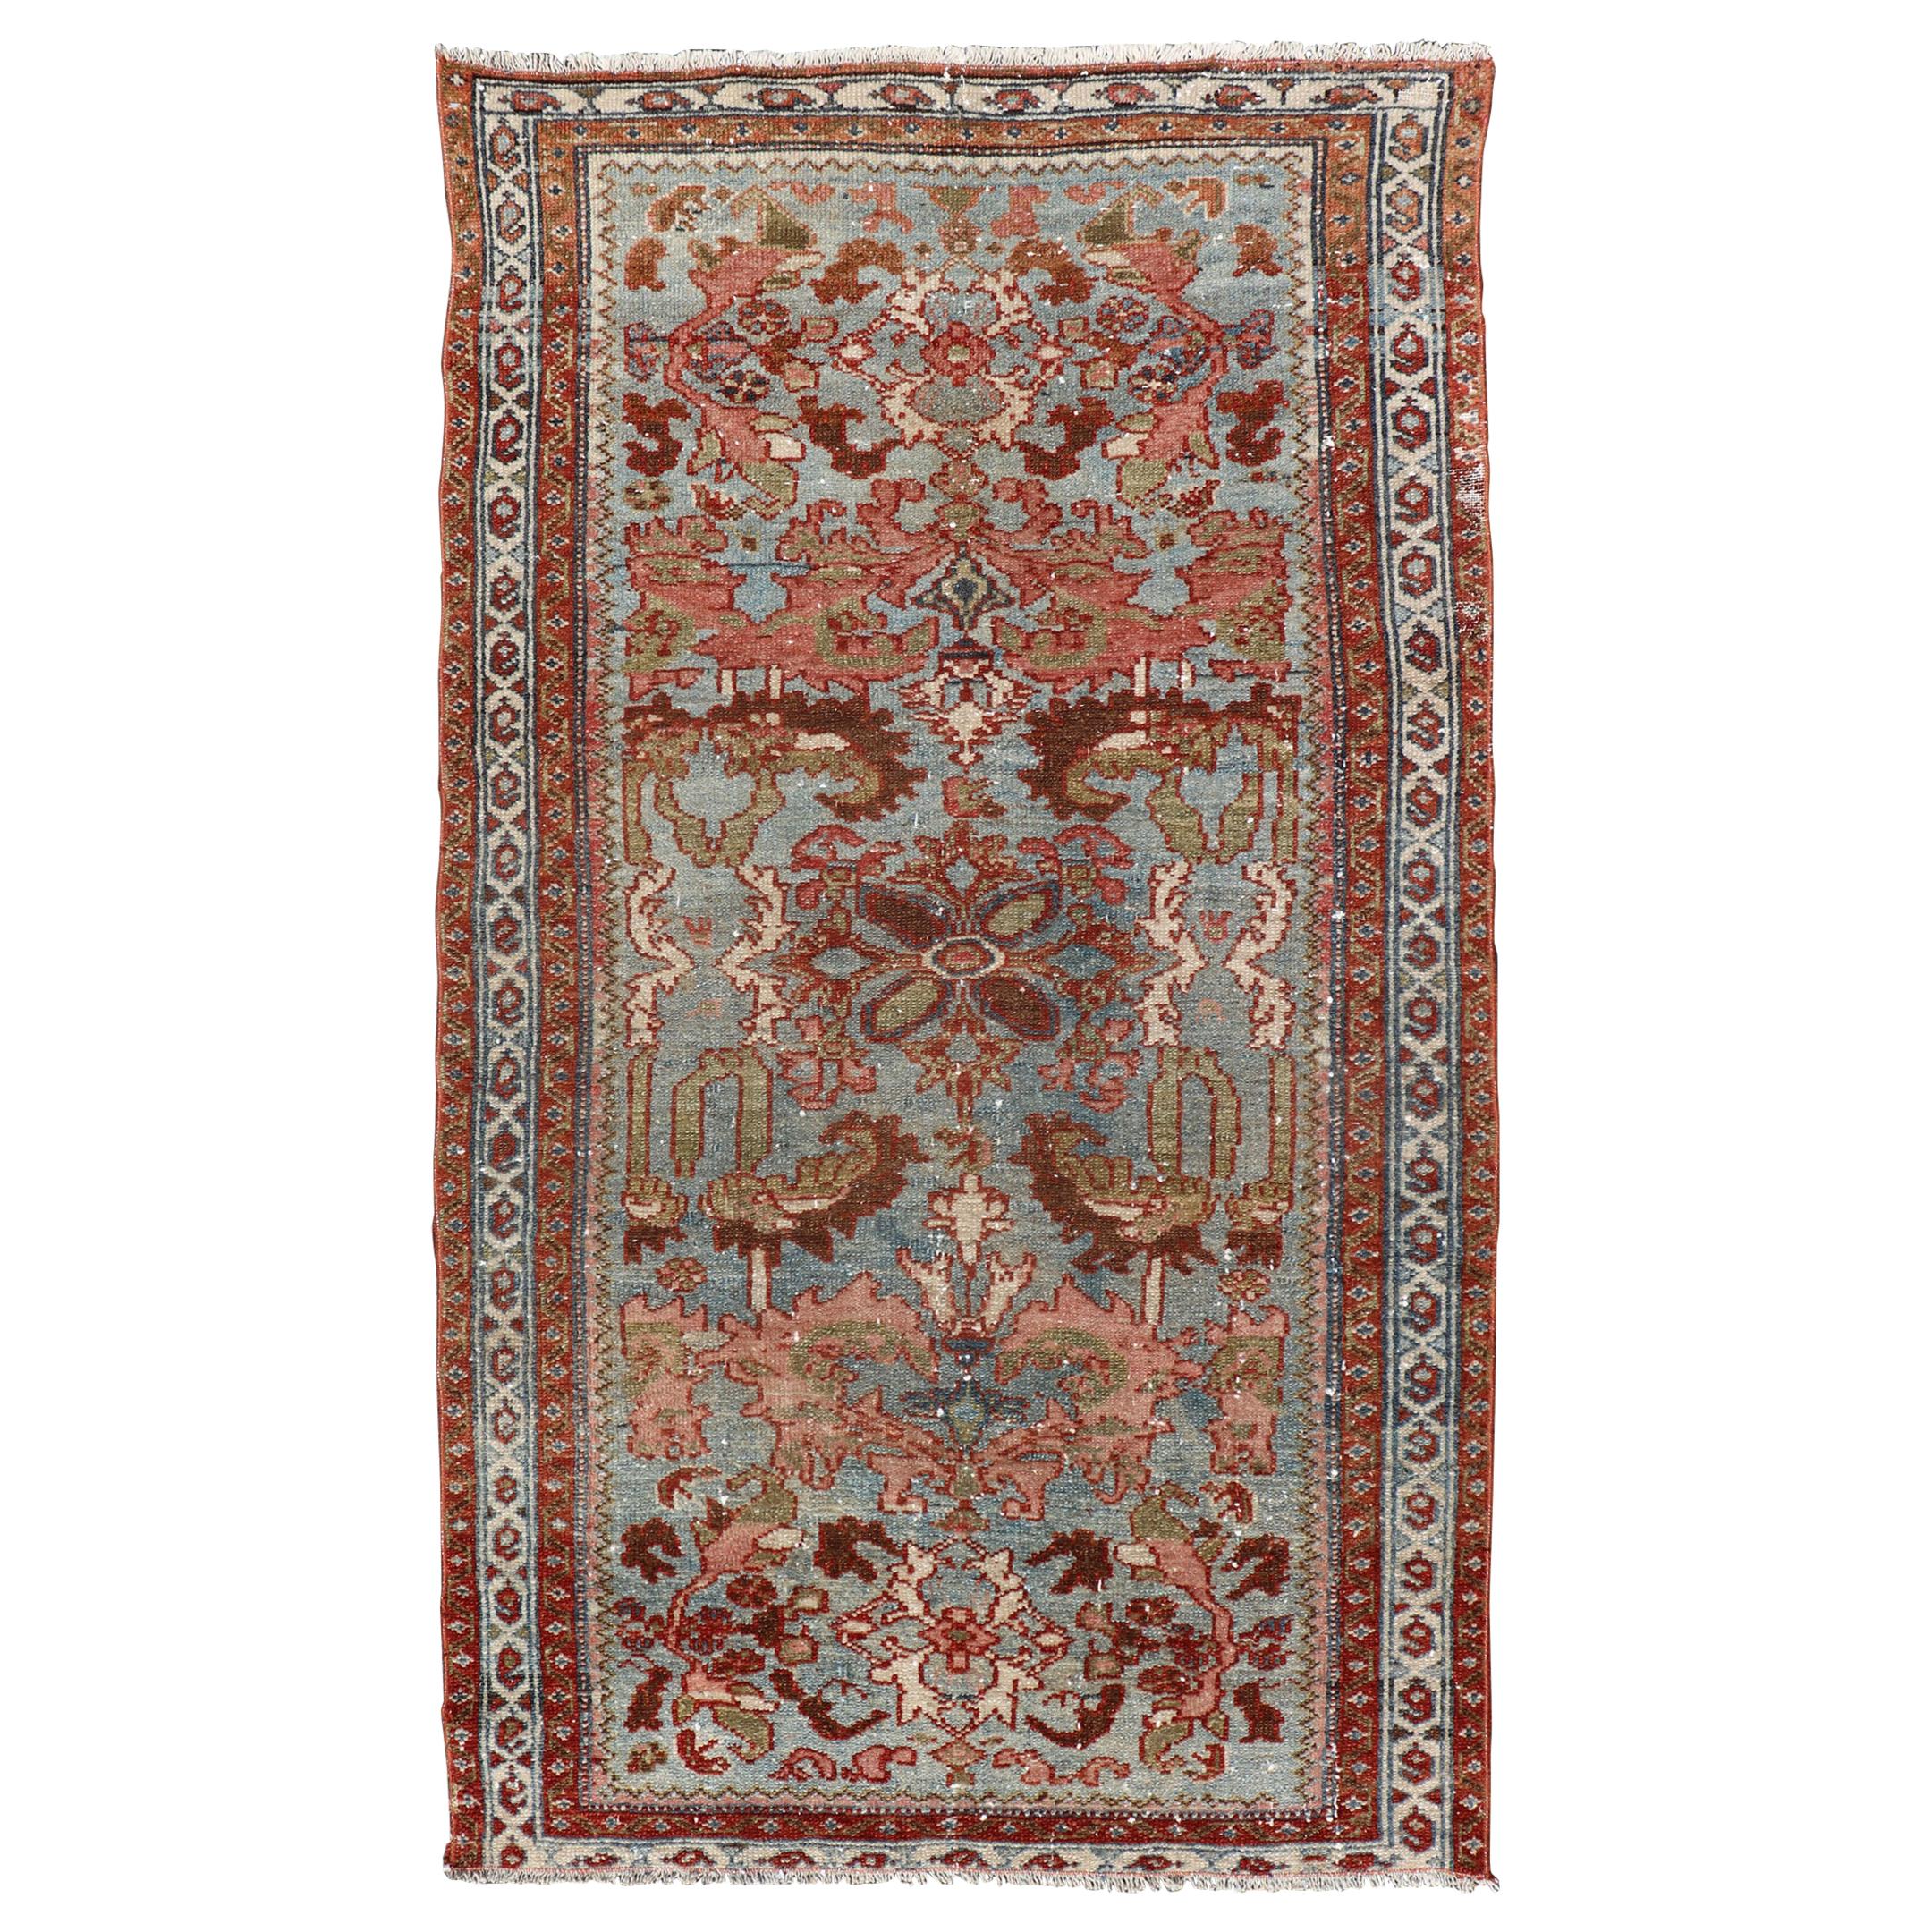 Antique Persian Malayer Rug with a Blue Field and Stylized Floral Design